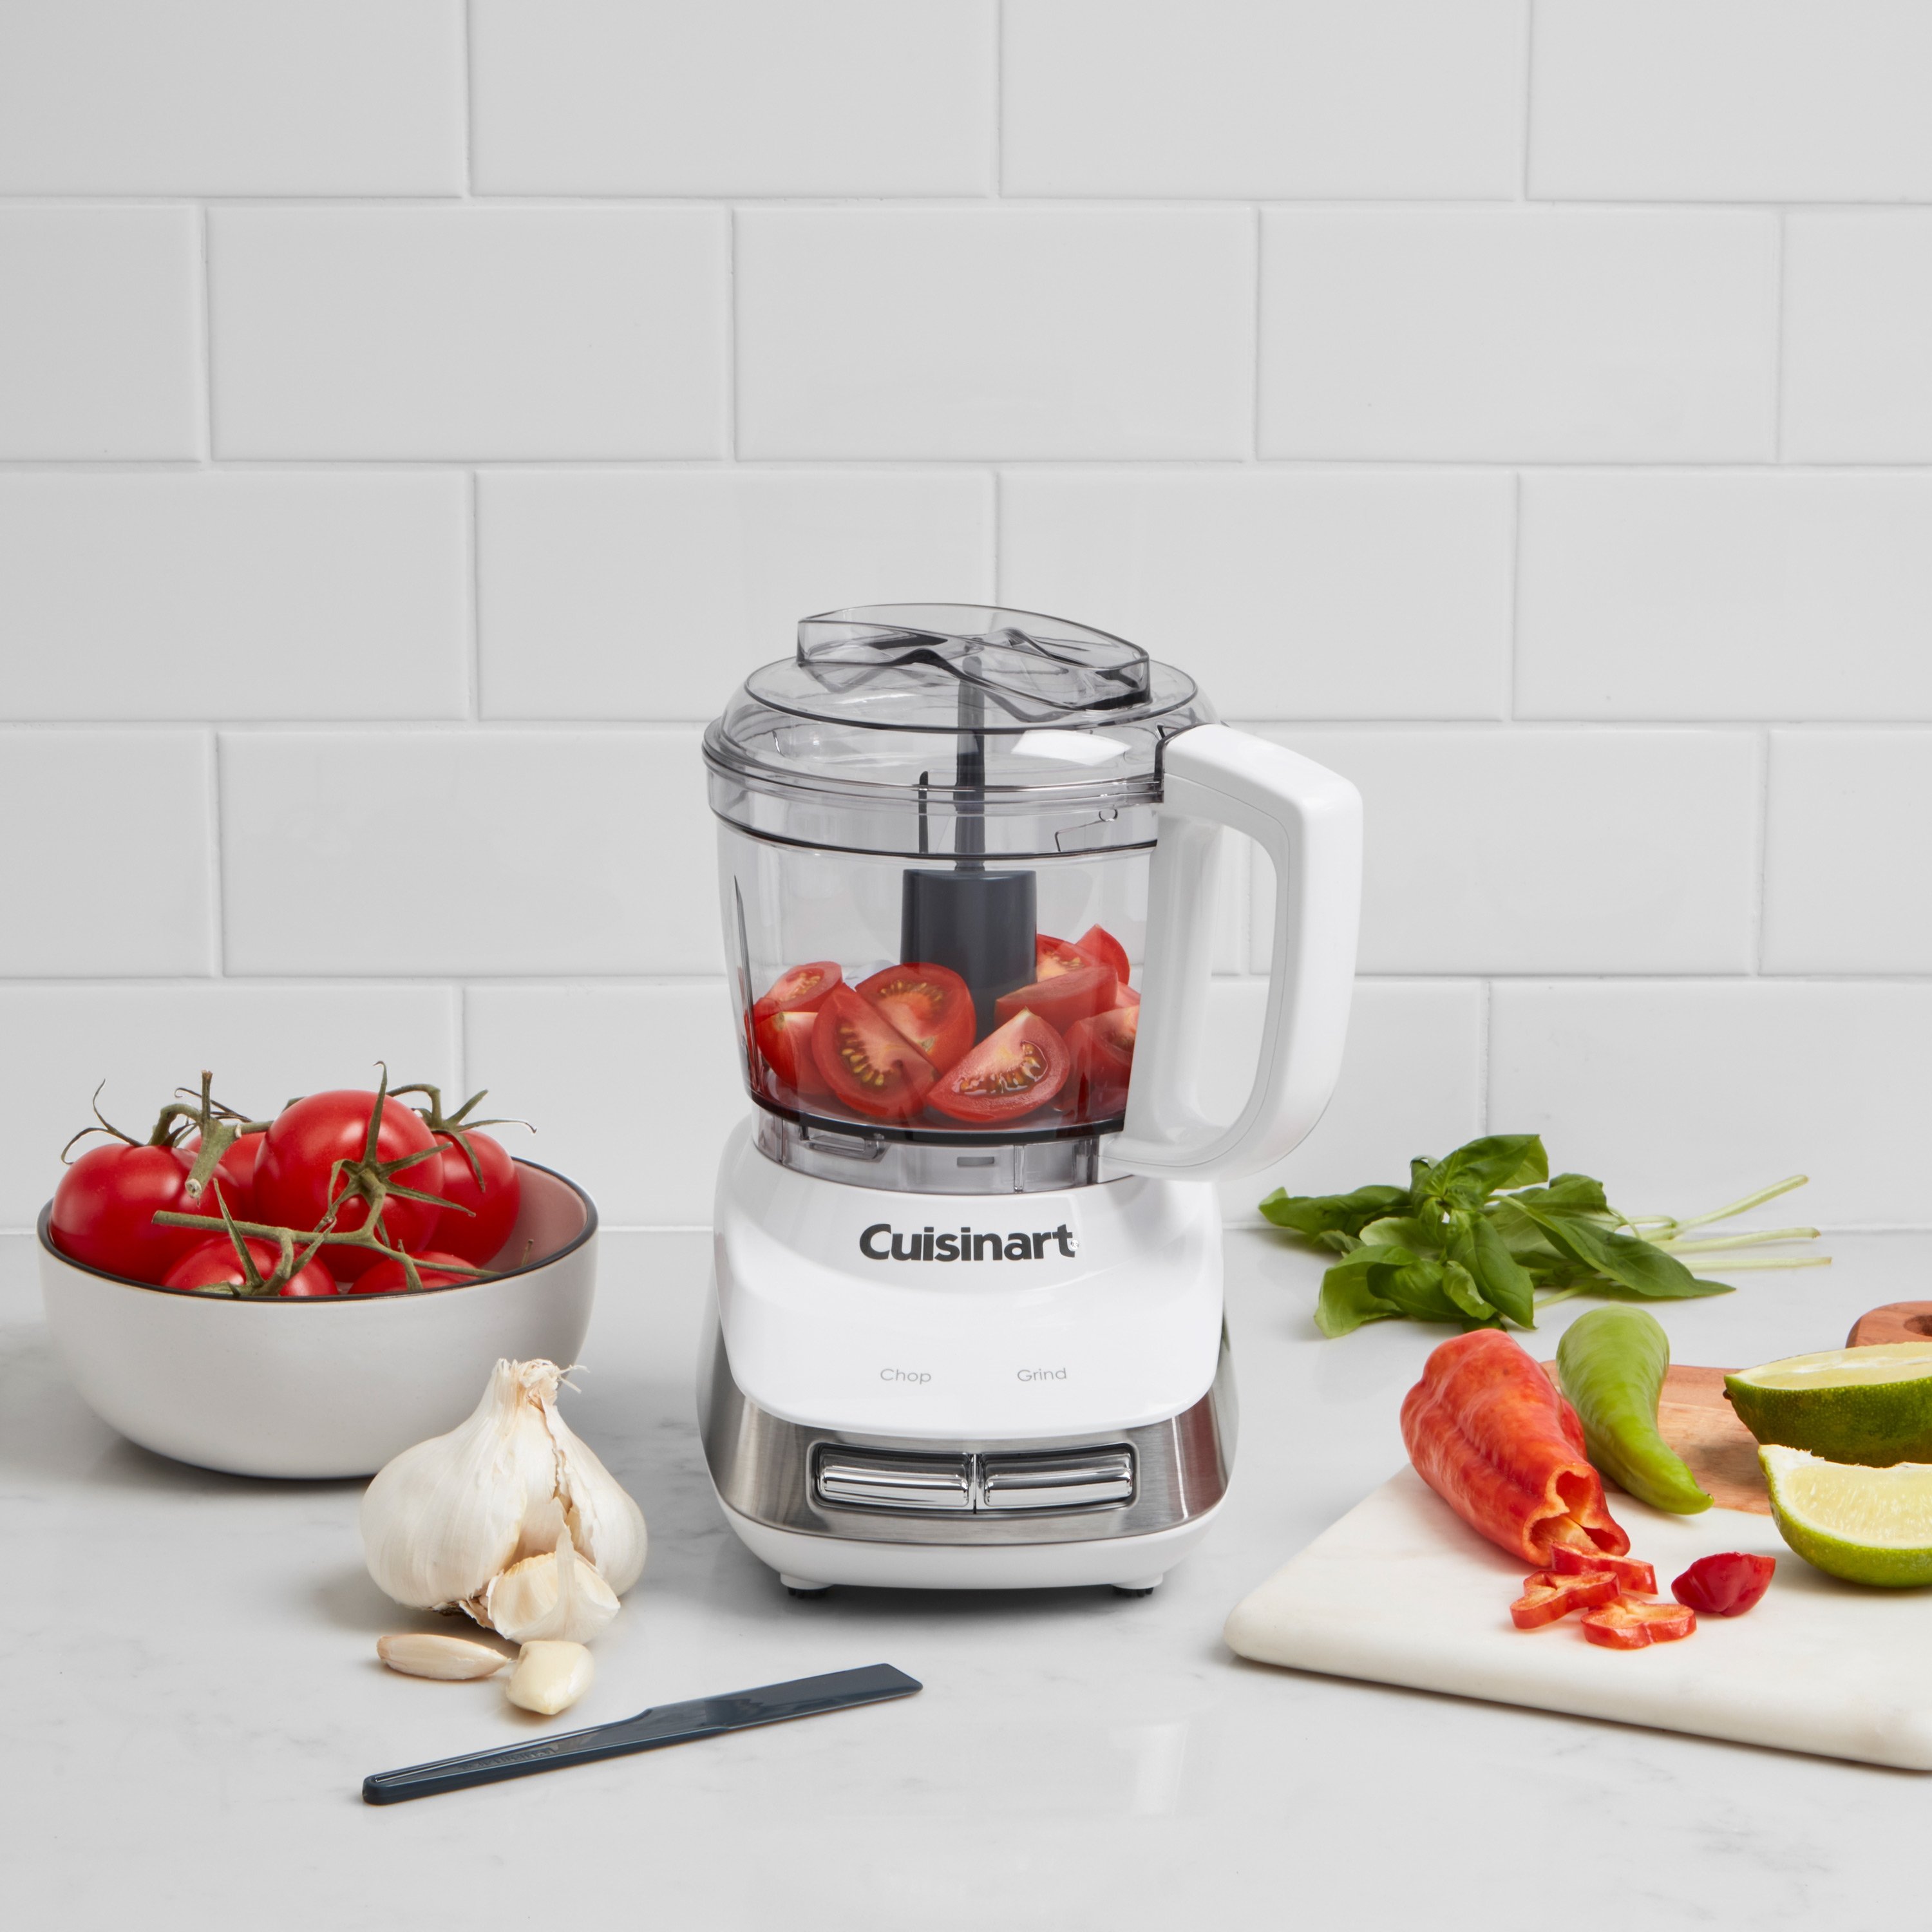 https://www.cuisinart.com/globalassets/cuisinart-image-feed/mch-4/mch4_lifestyle_cropped.jpg